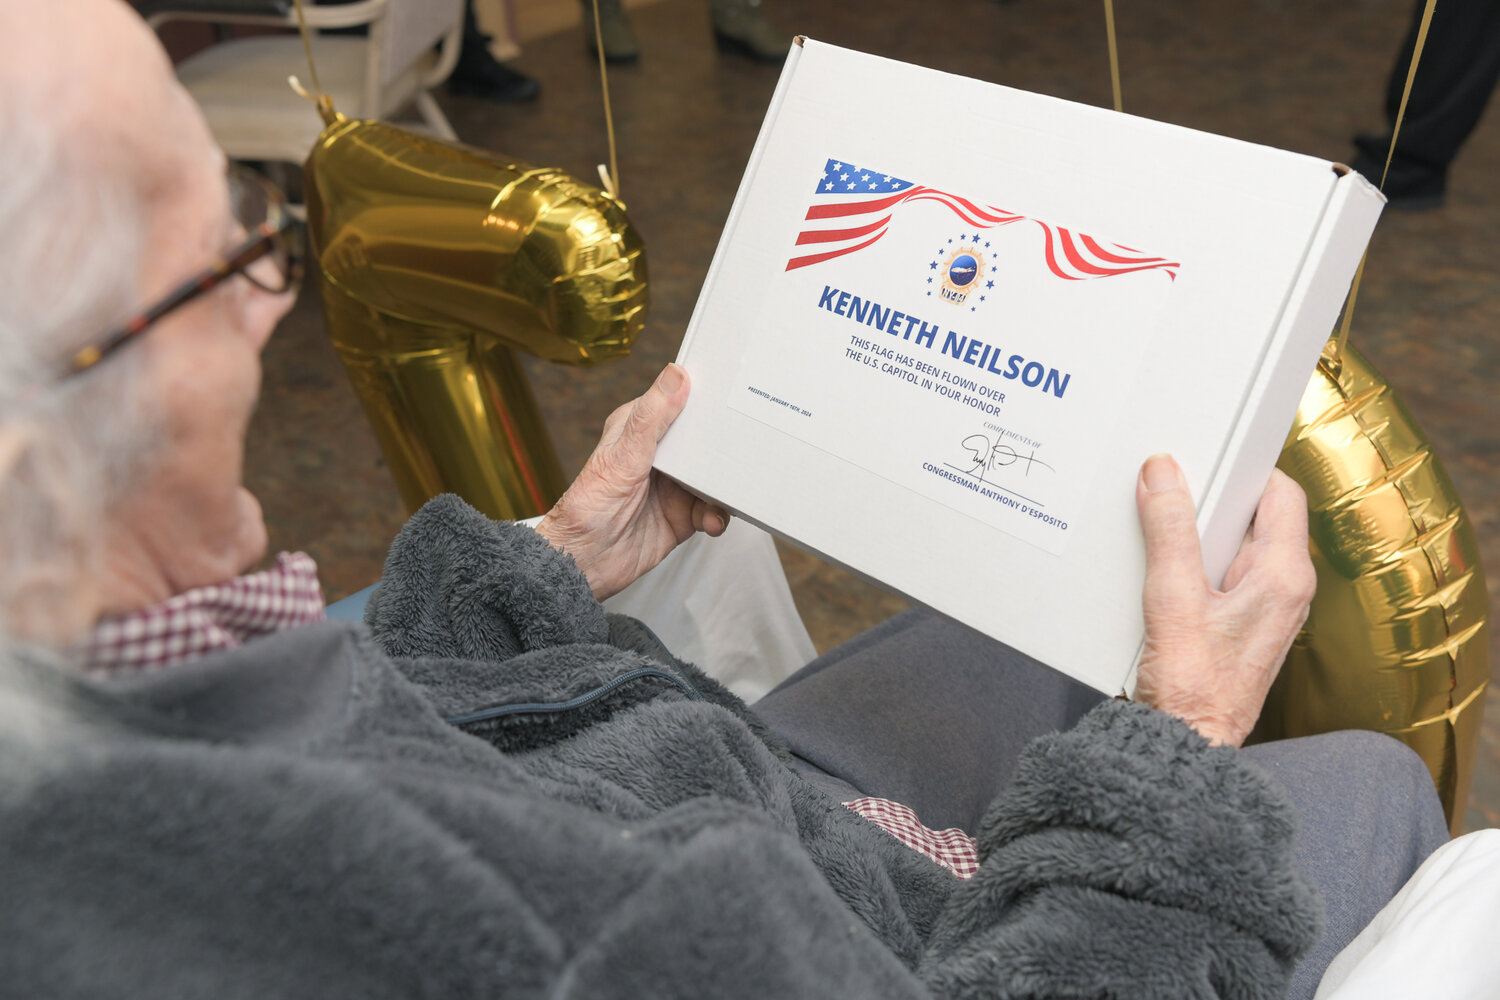 In celebration of this milestone, U.S. Rep. Anthony D’Esposito sent Neilson a flag that was flown in his honor.